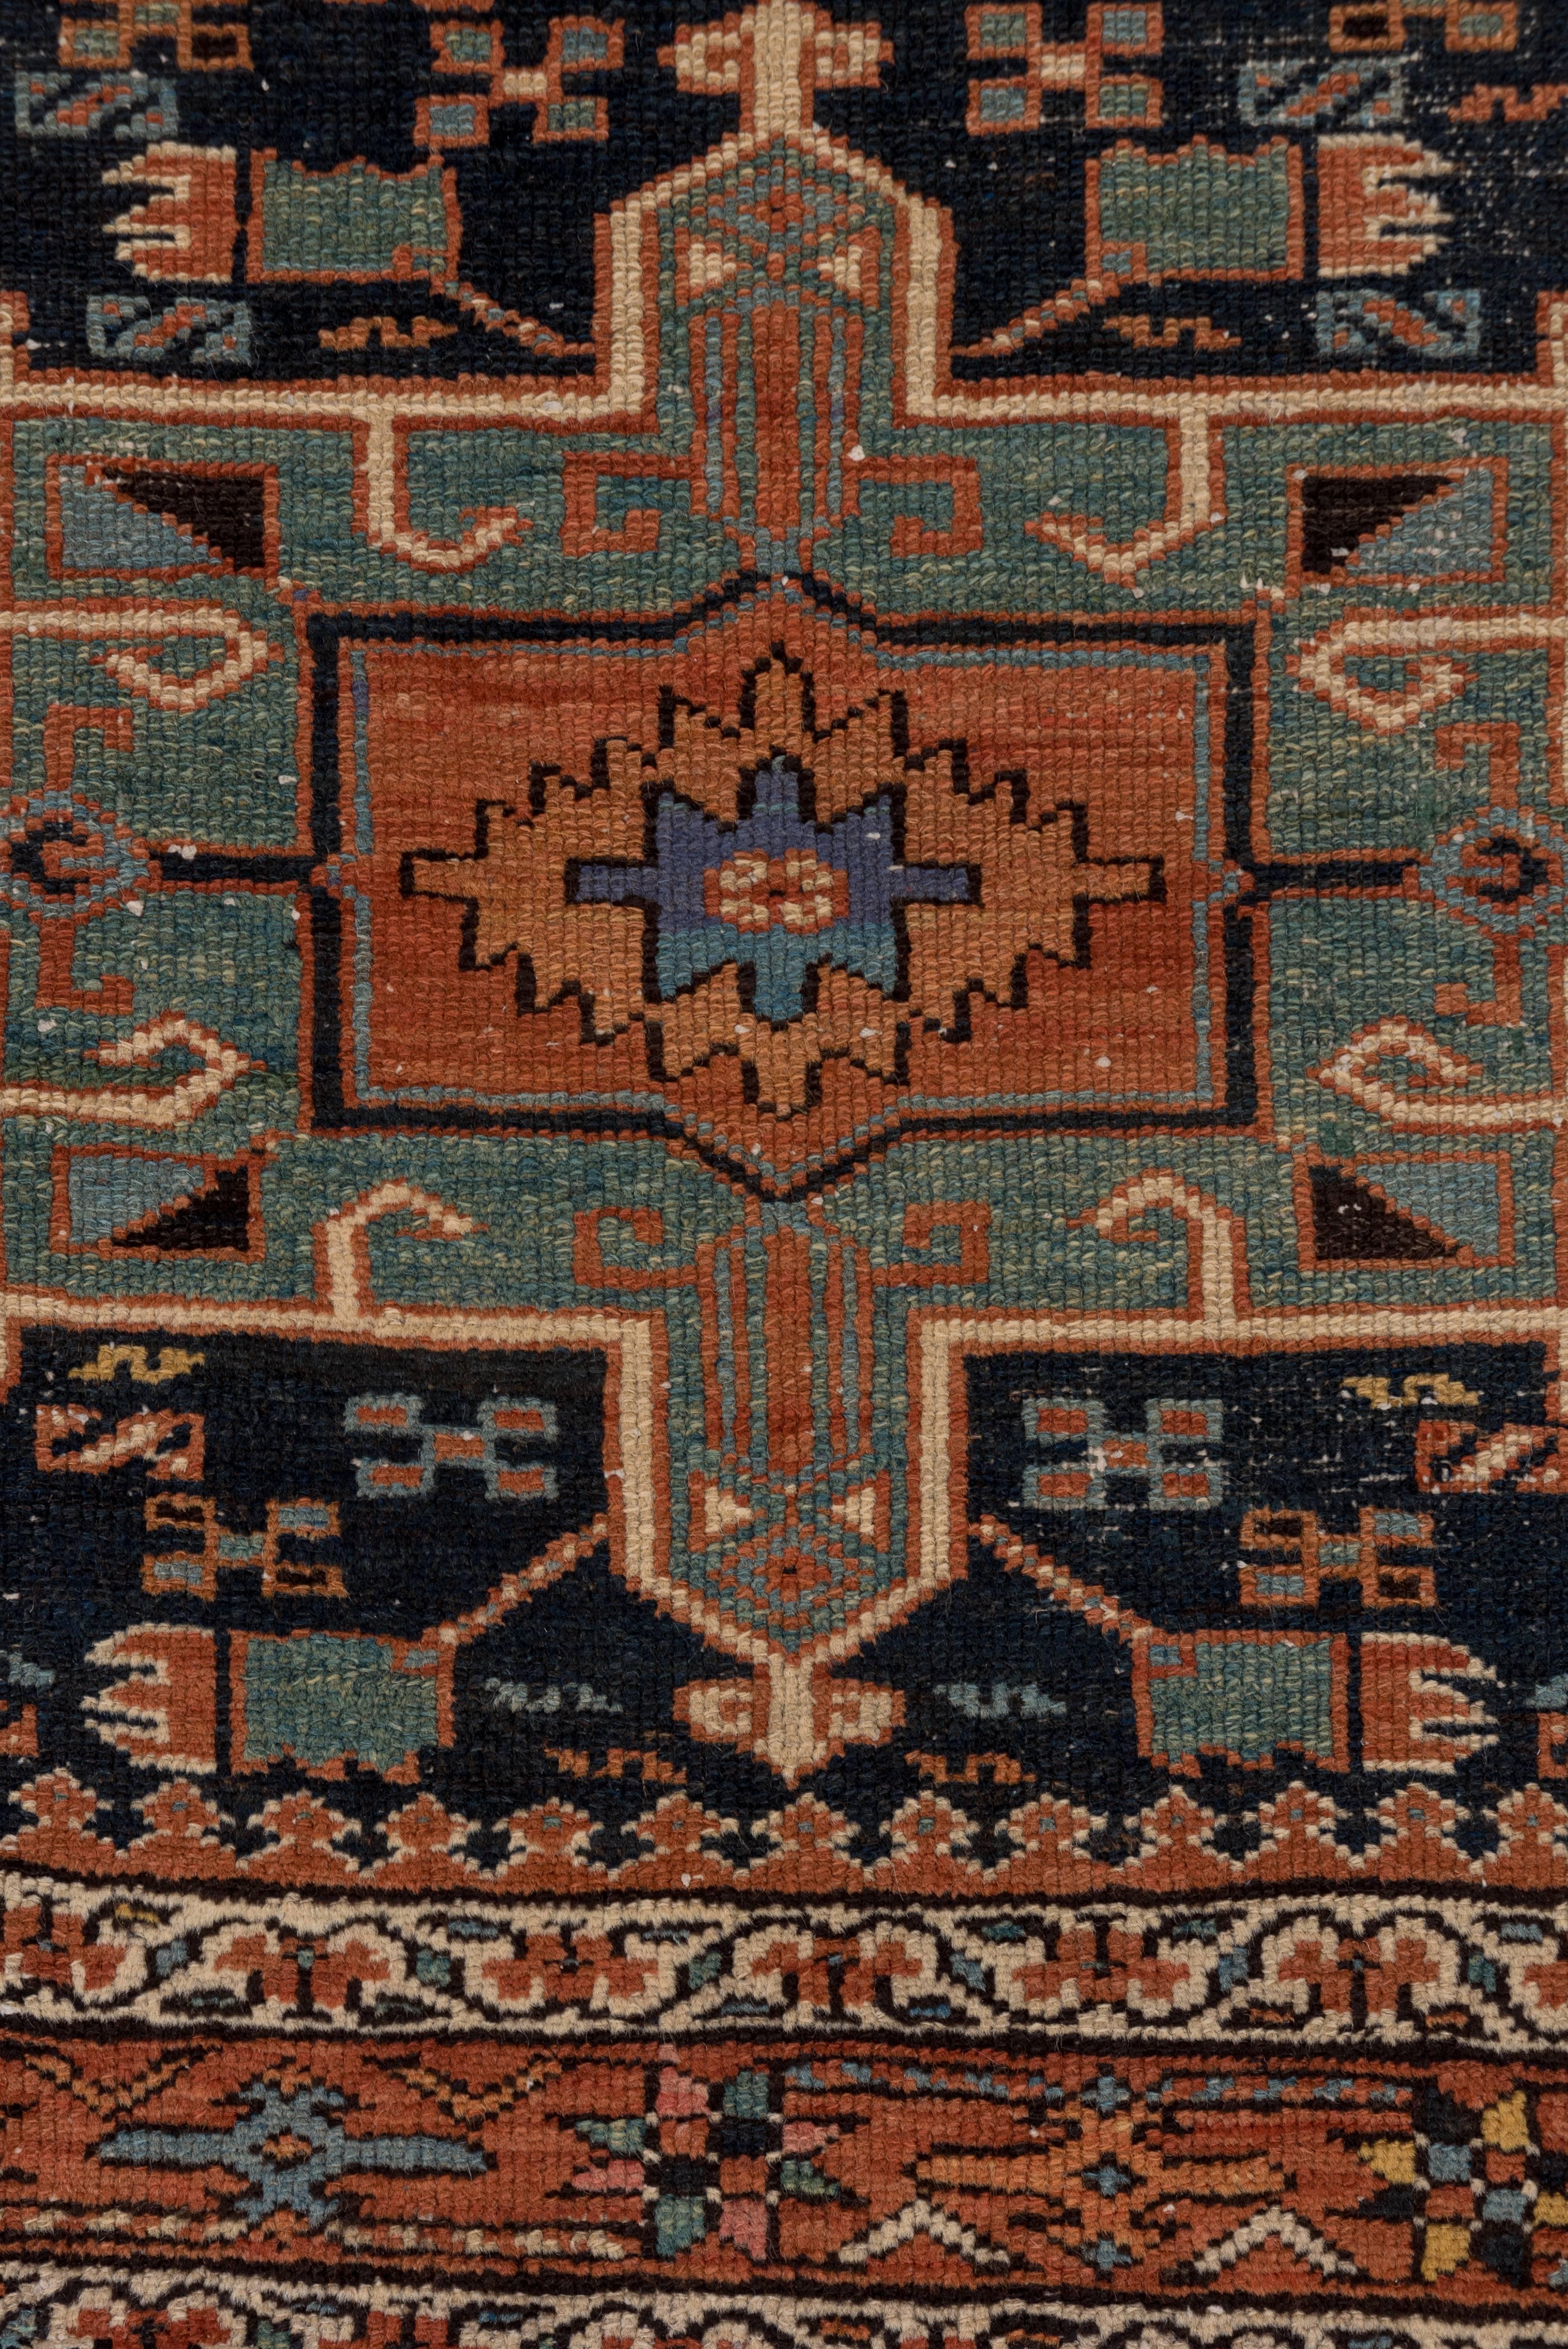 This attractive village rug was woven in the area of Karaja in the N.W. Iranian province of Azerbaijan, close to the better known town of Heriz . The typically hooked medallion and boxed rectangular medallions flanking it appear to float on the deep